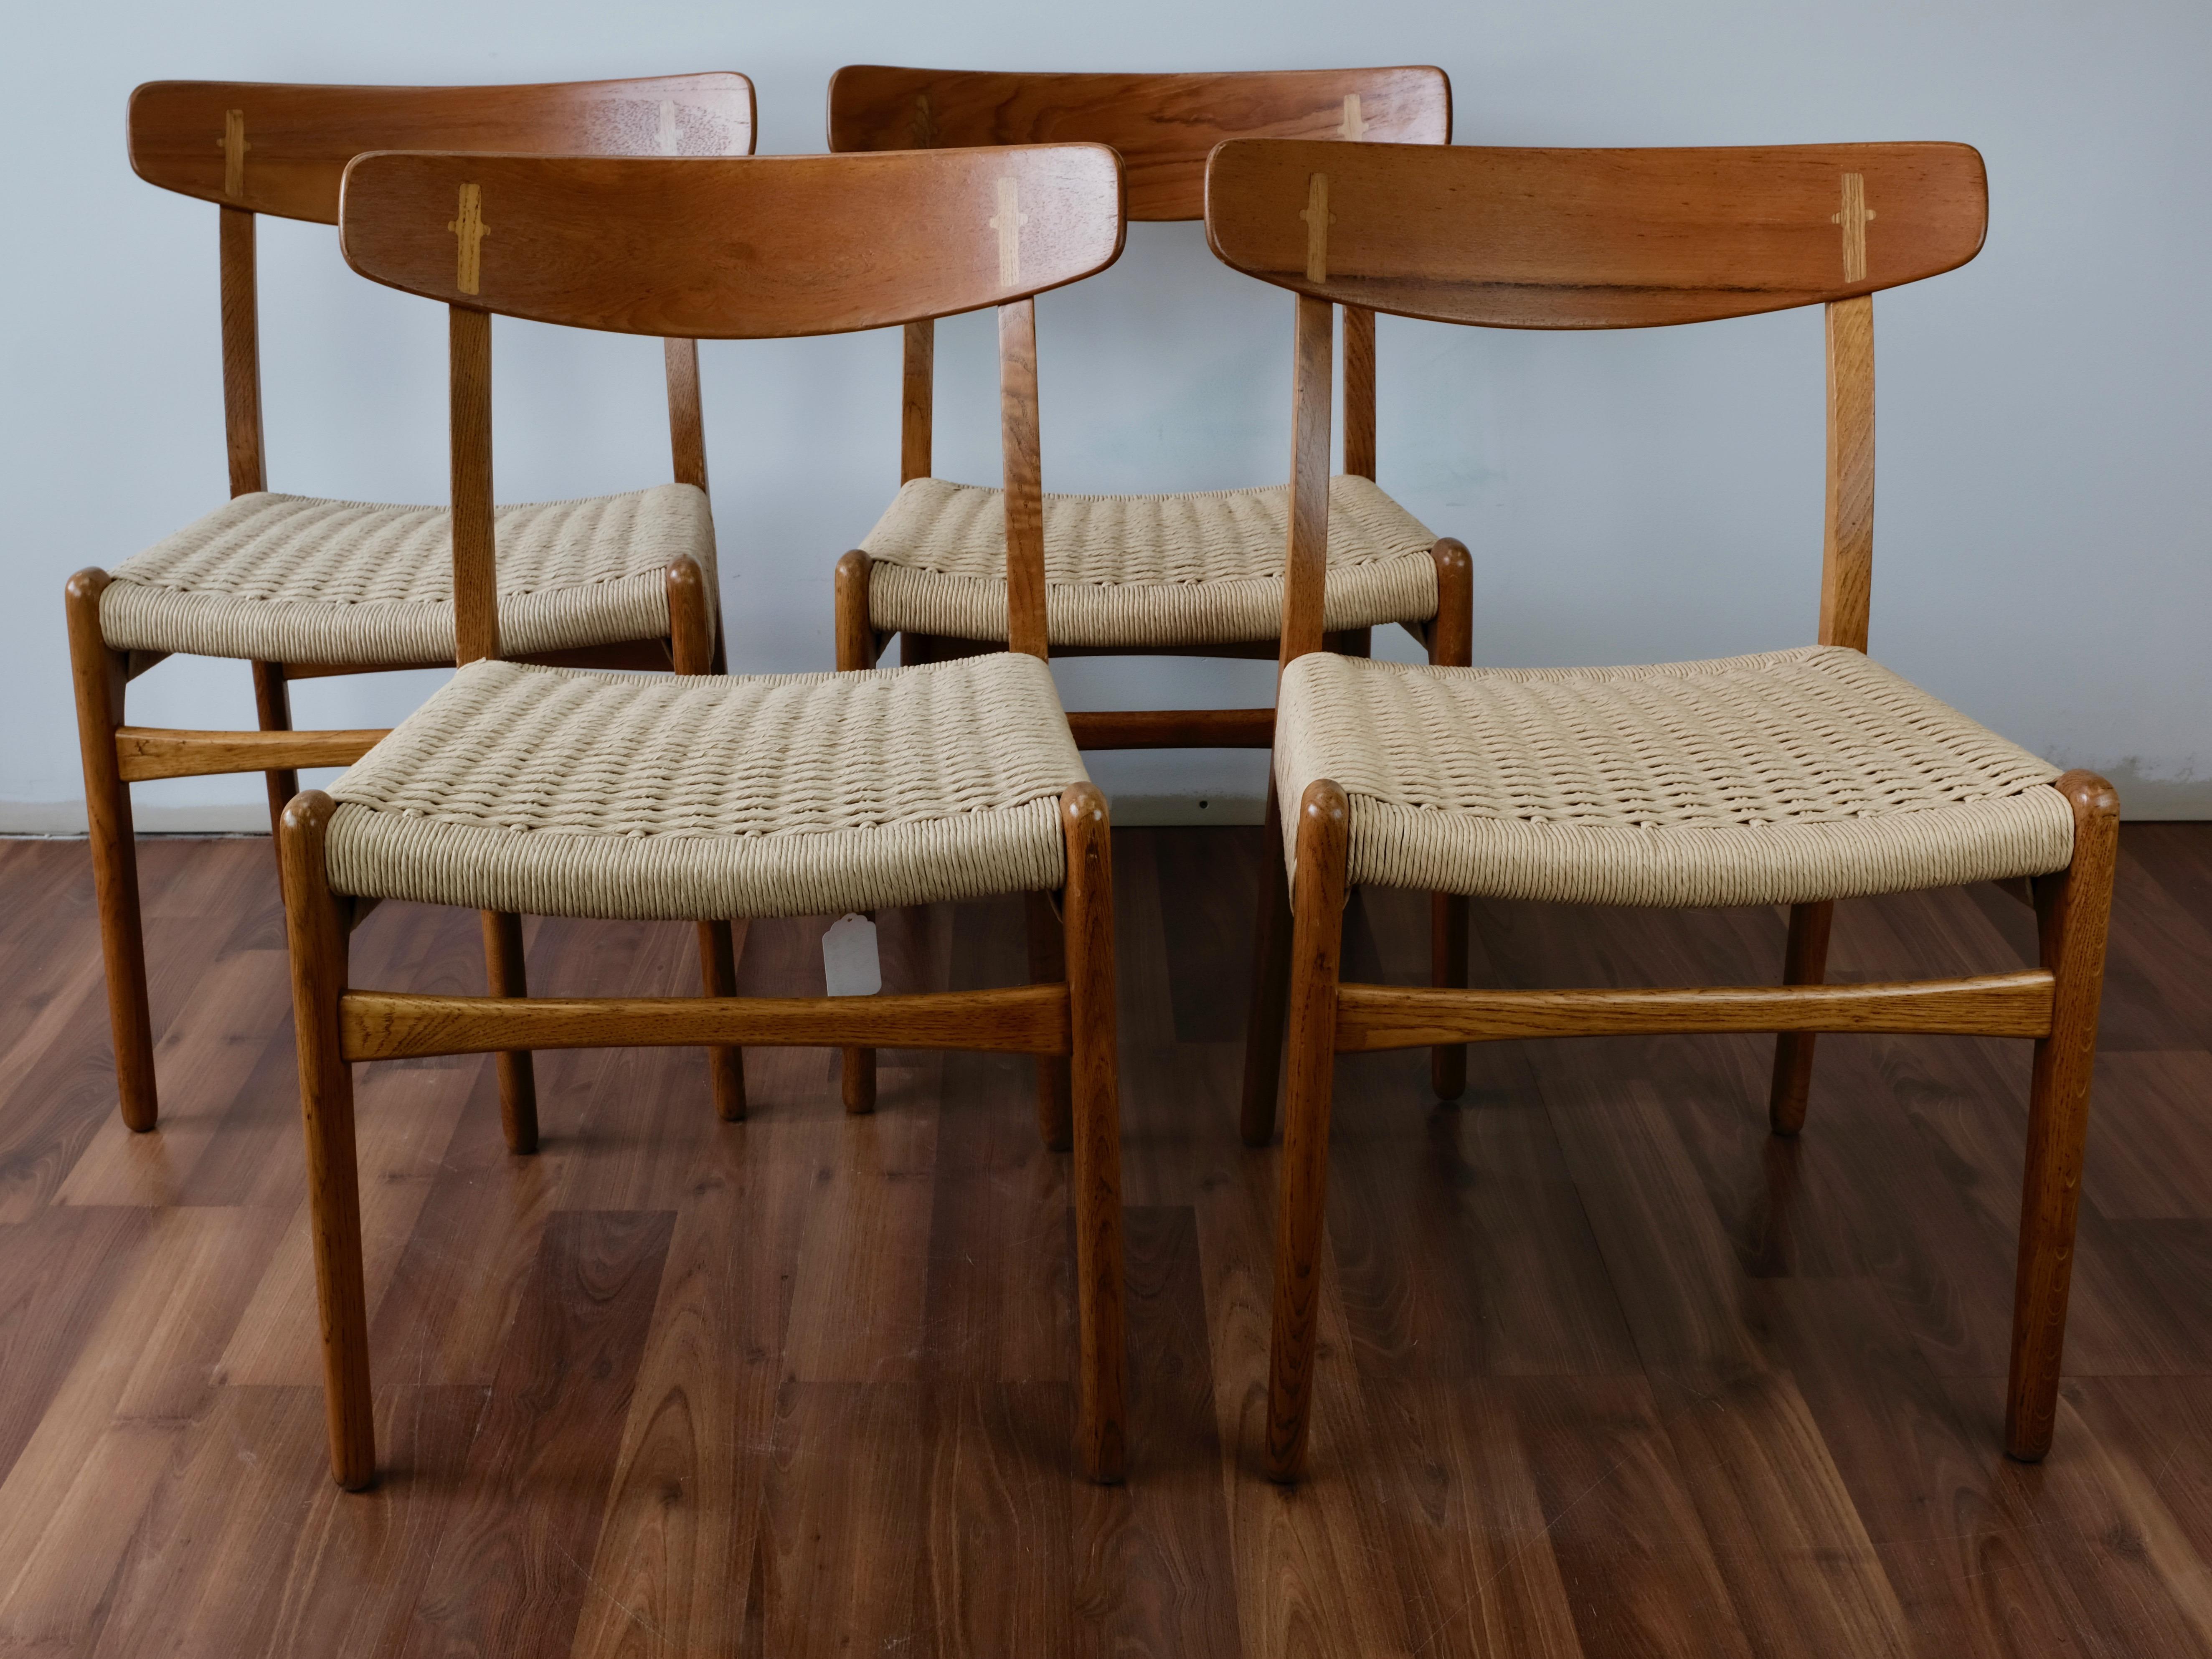 Set of 4 CH23 dining chairs designed by Hans Wegner and made in Denmark by Carl Hansen & Søn. 

The teak bent-lamination backrests feature distinctive cruciform cover caps in oak where the backs join the solid oak frames.

The double-woven paper